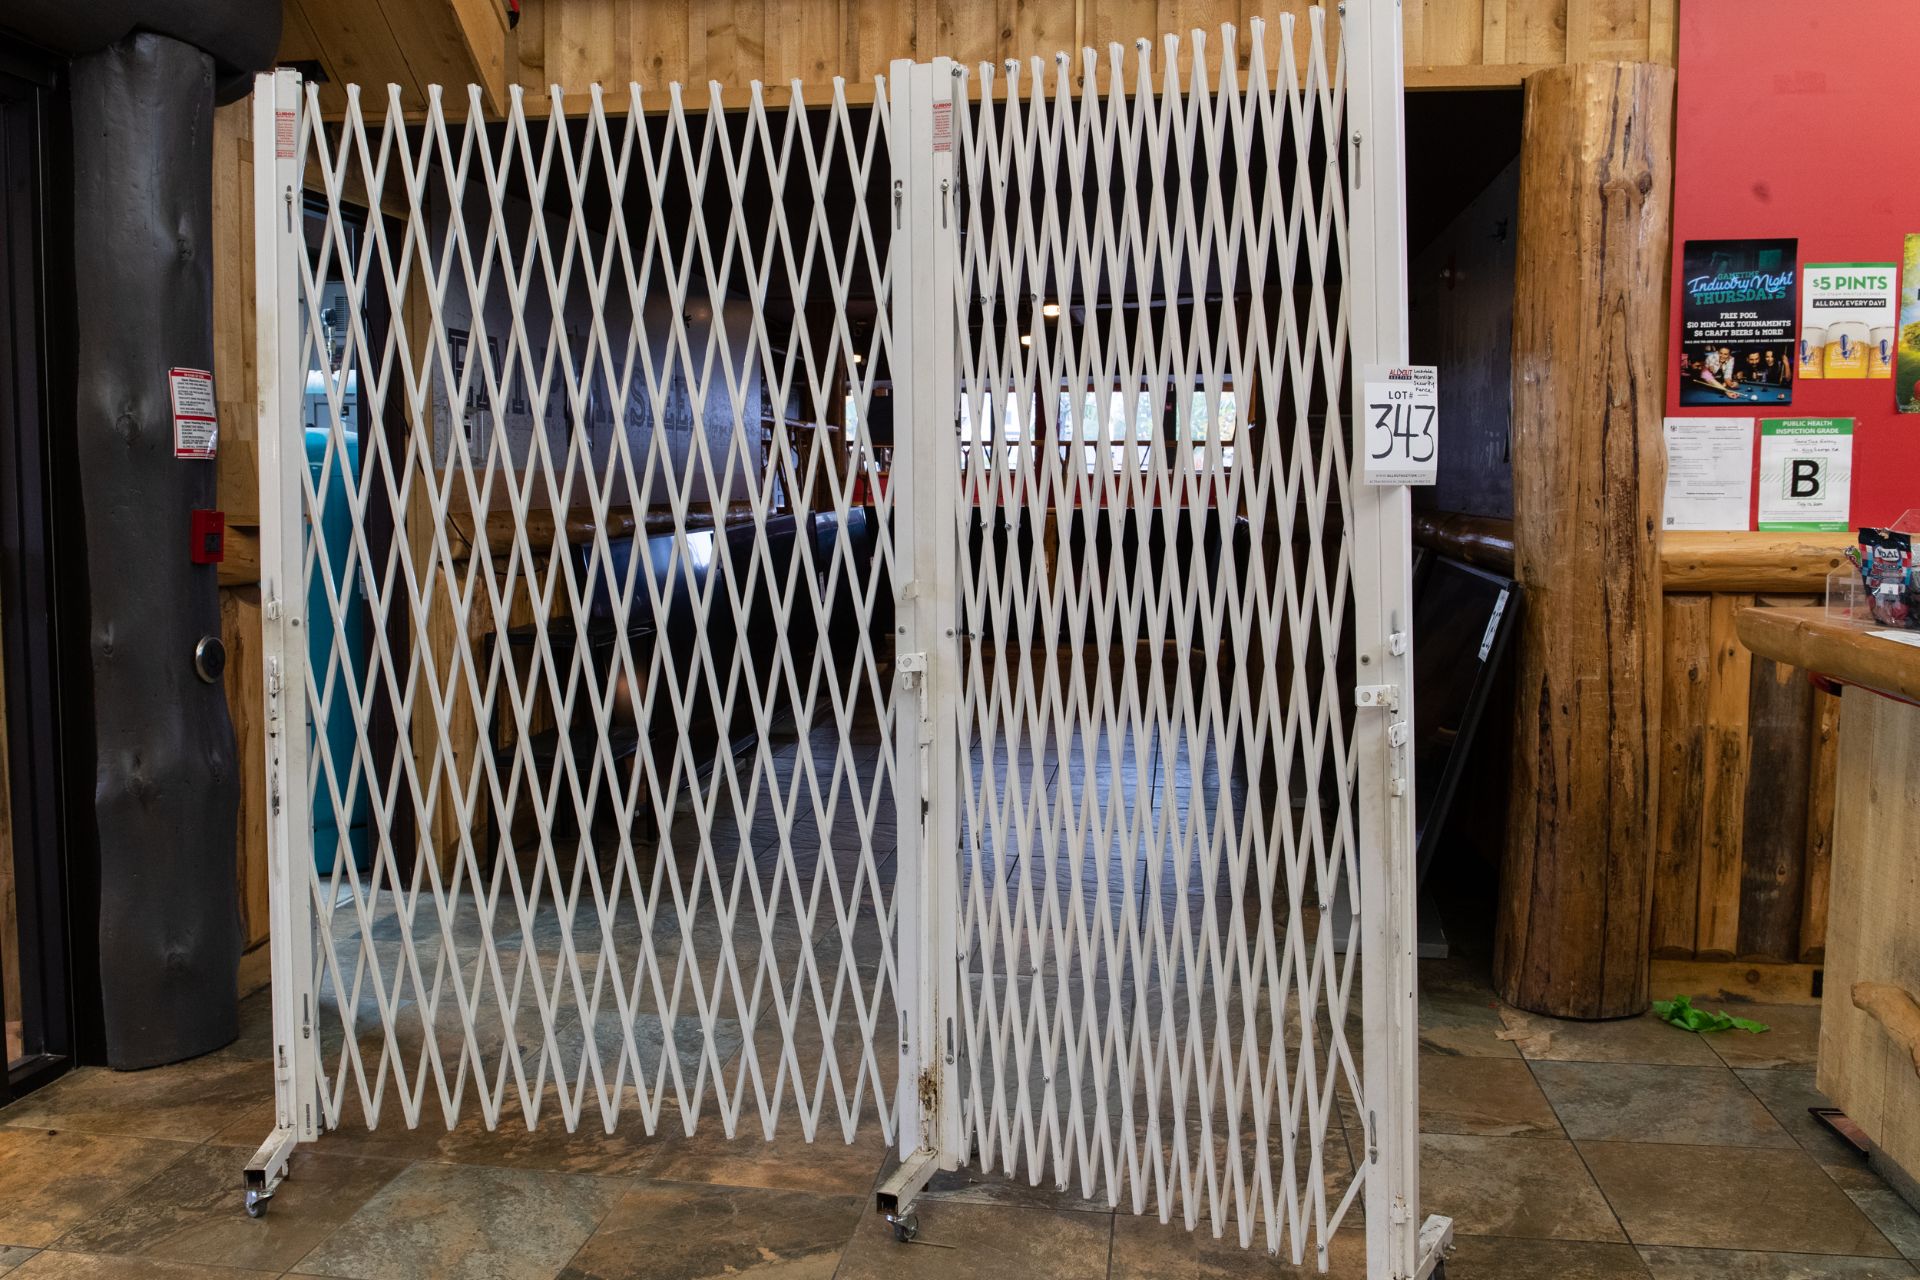 LOCKABLE ACCORDIAN STYLE SECURITY FENCE - 17FT.